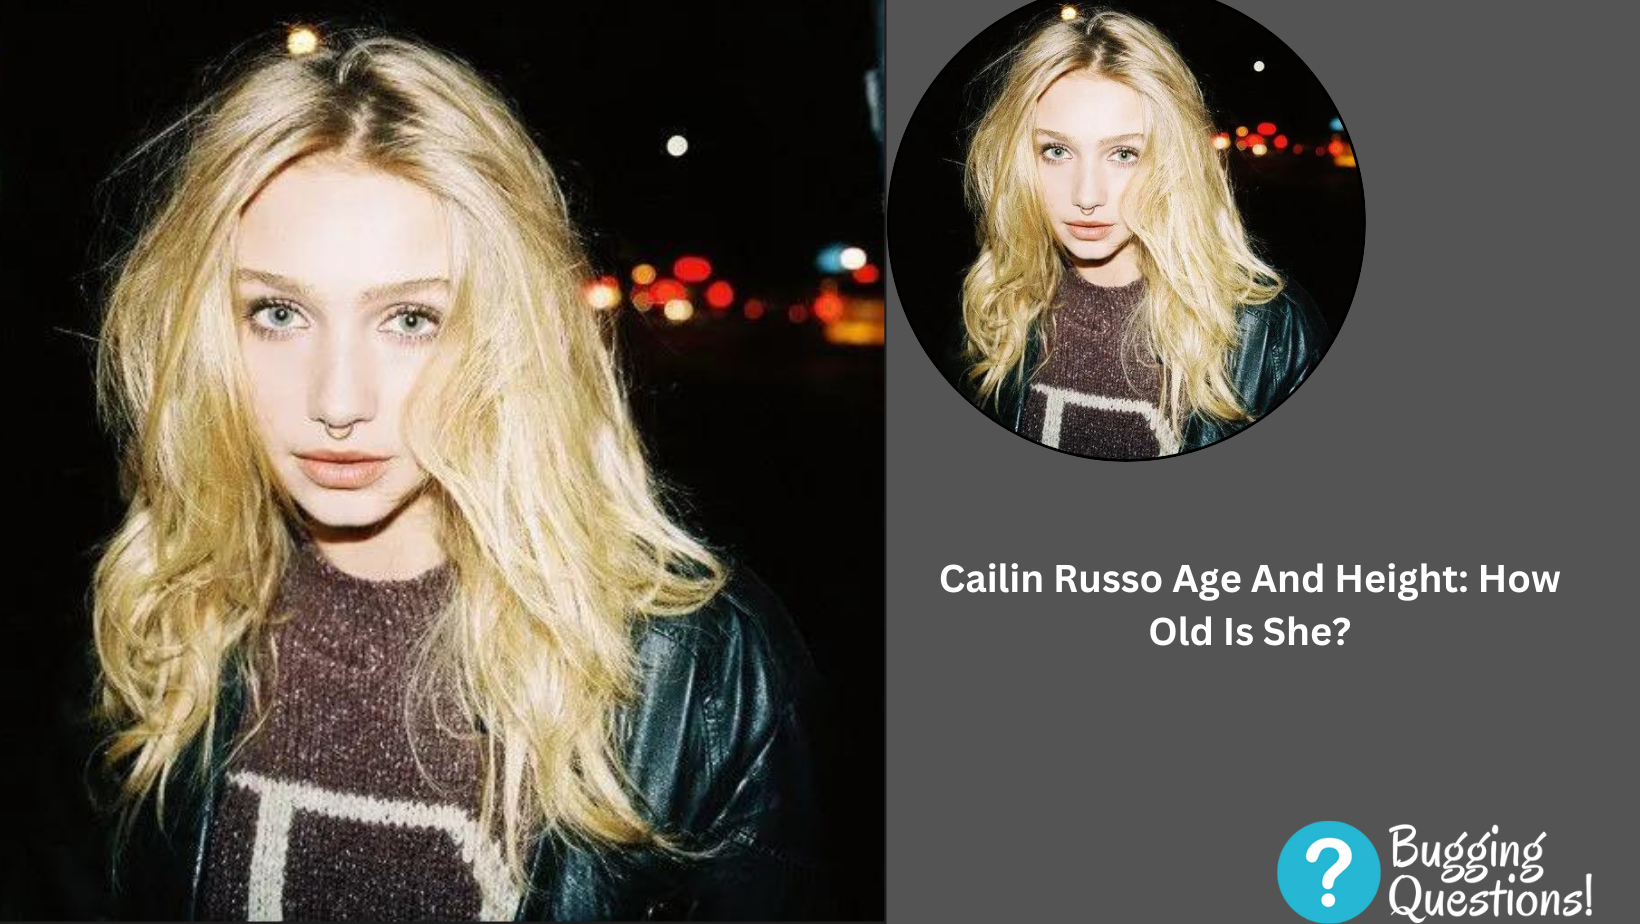 Cailin Russo Age And Height